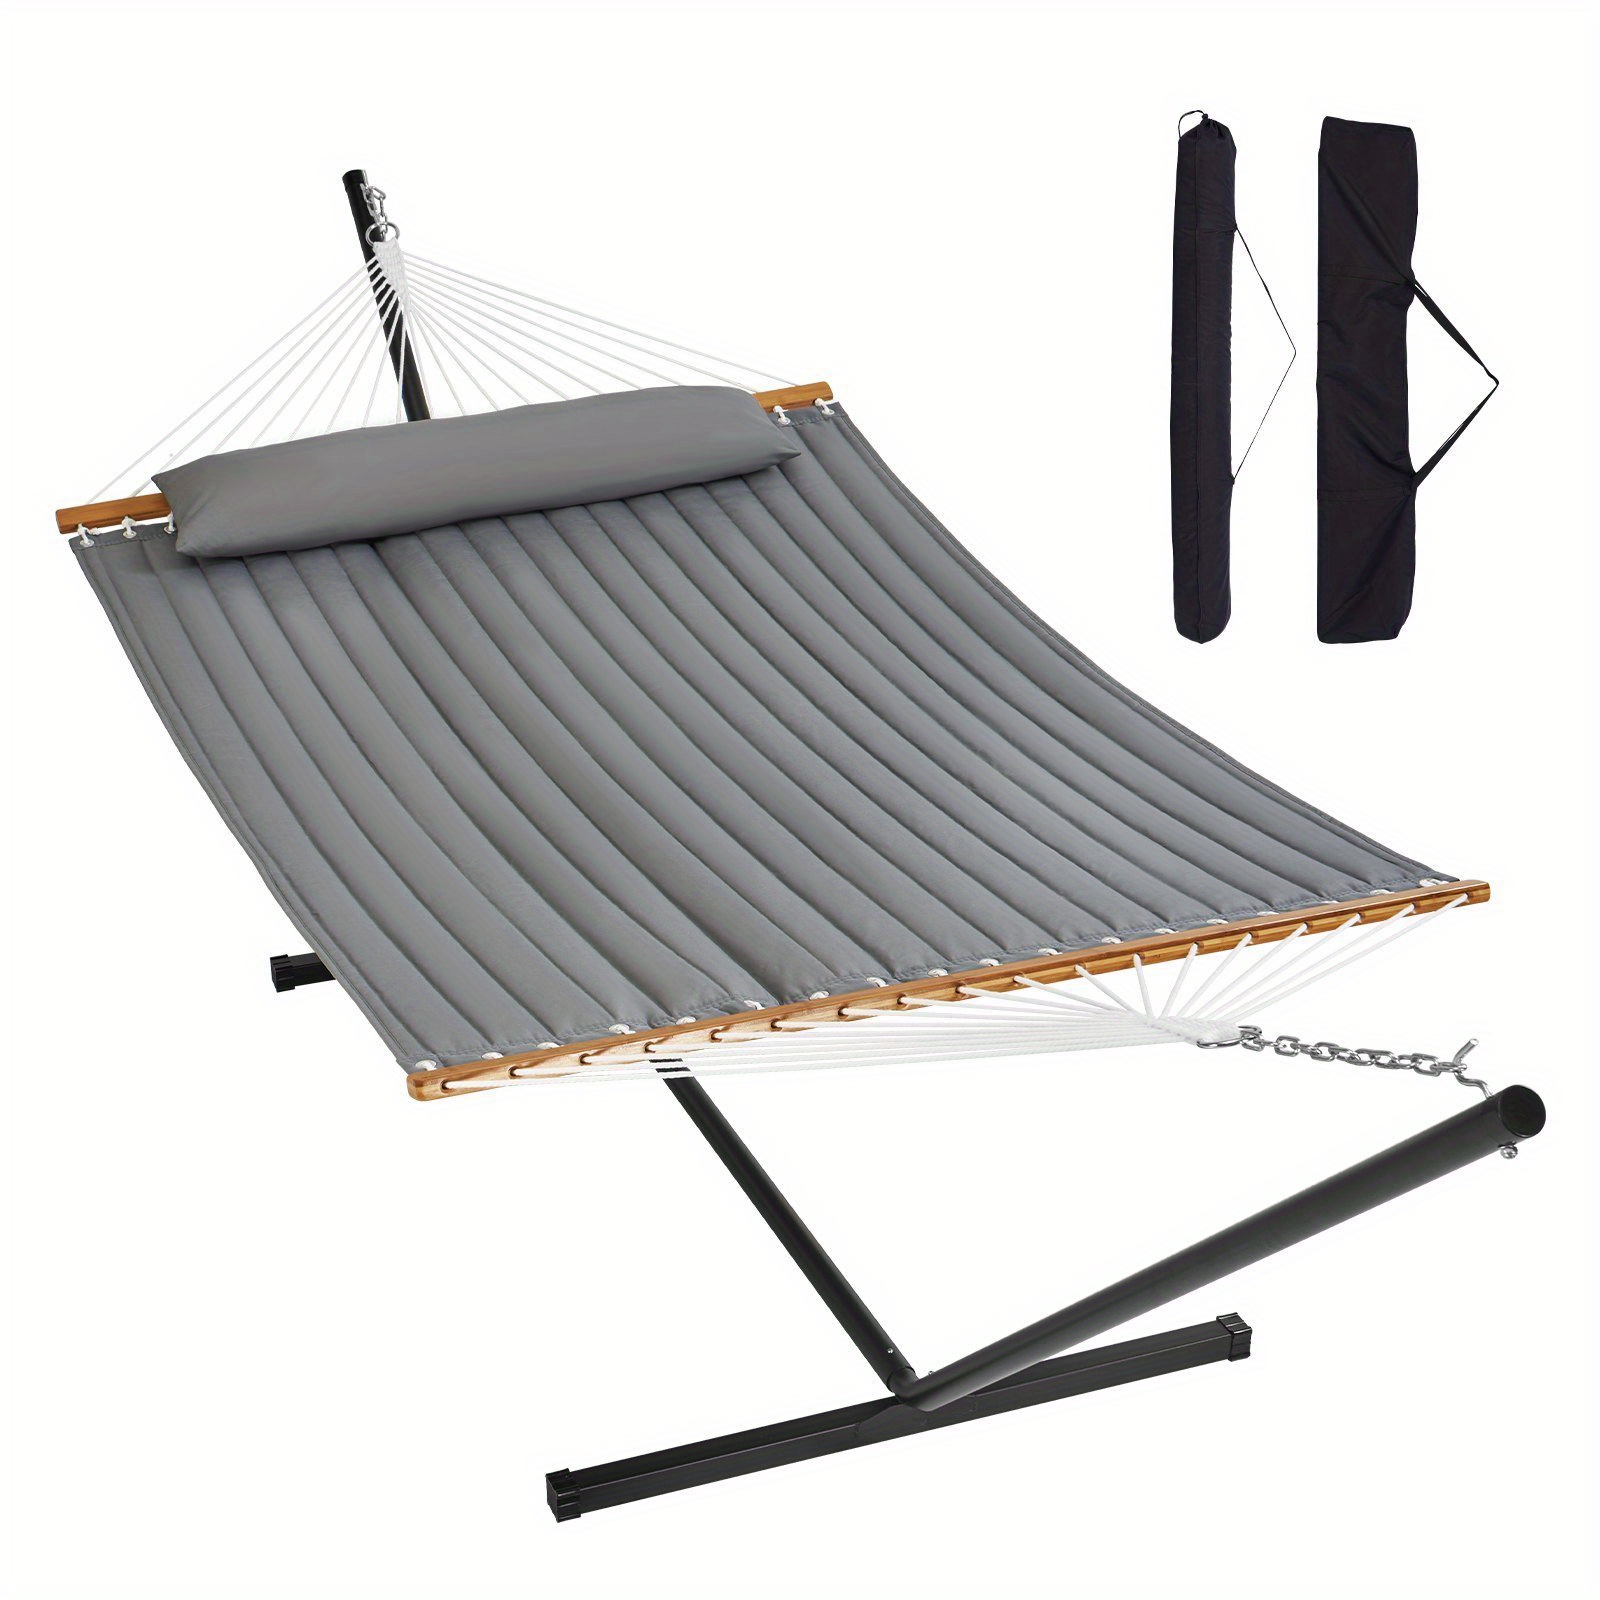 

2 Person Hammock With Stand Included Heavy Duty 480lb Capacity, Double Hammock With 12 Ft Steel Stand And Portable Carrying Bag And Pillow, Freestanding Hammock For Outdoor Patio Yard Beach